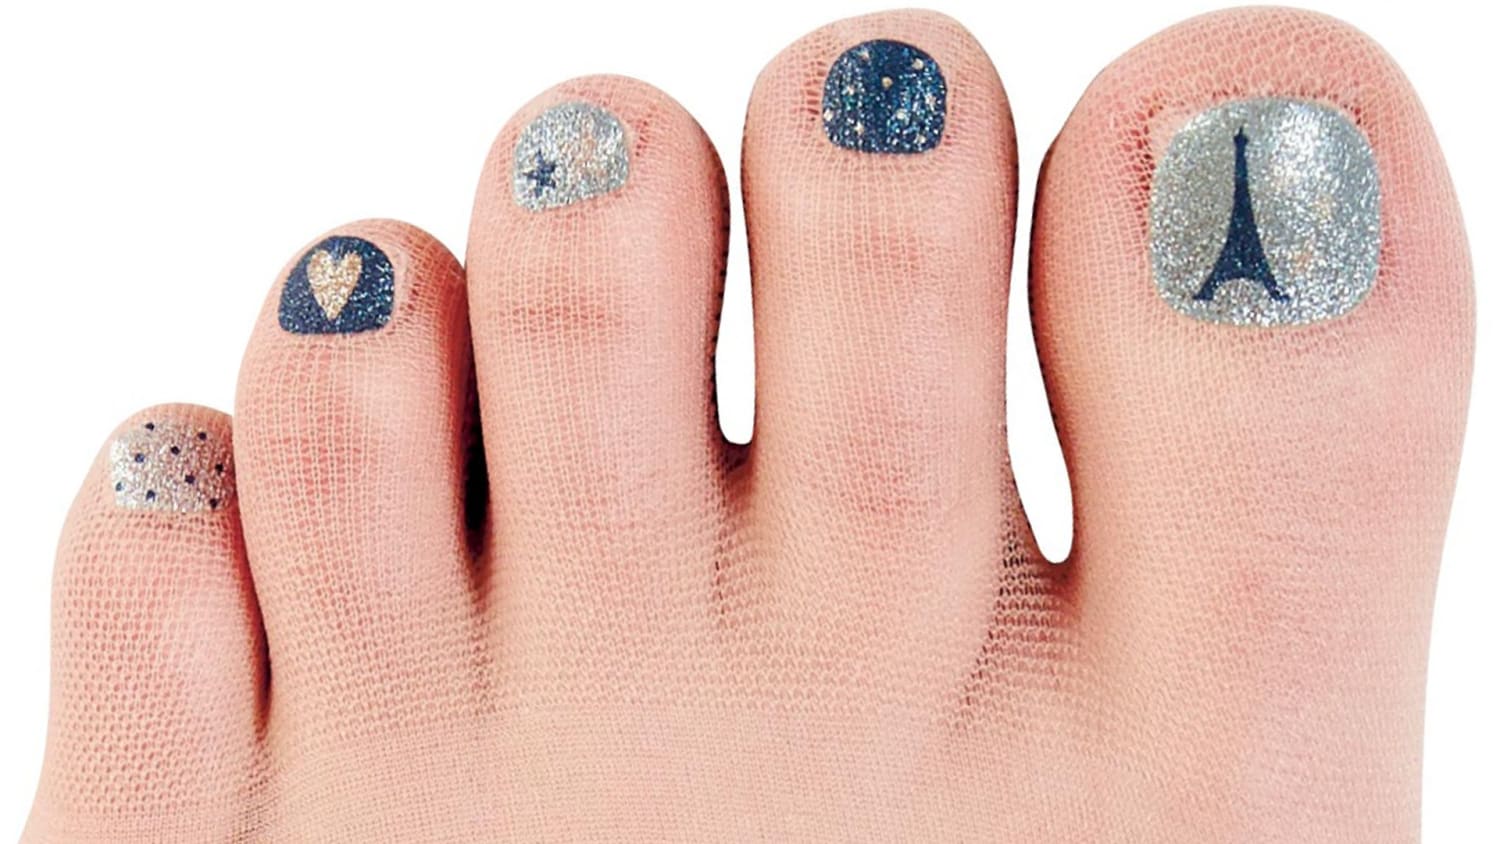 Only $13 to wear 100% dry nail polish that lasts on 